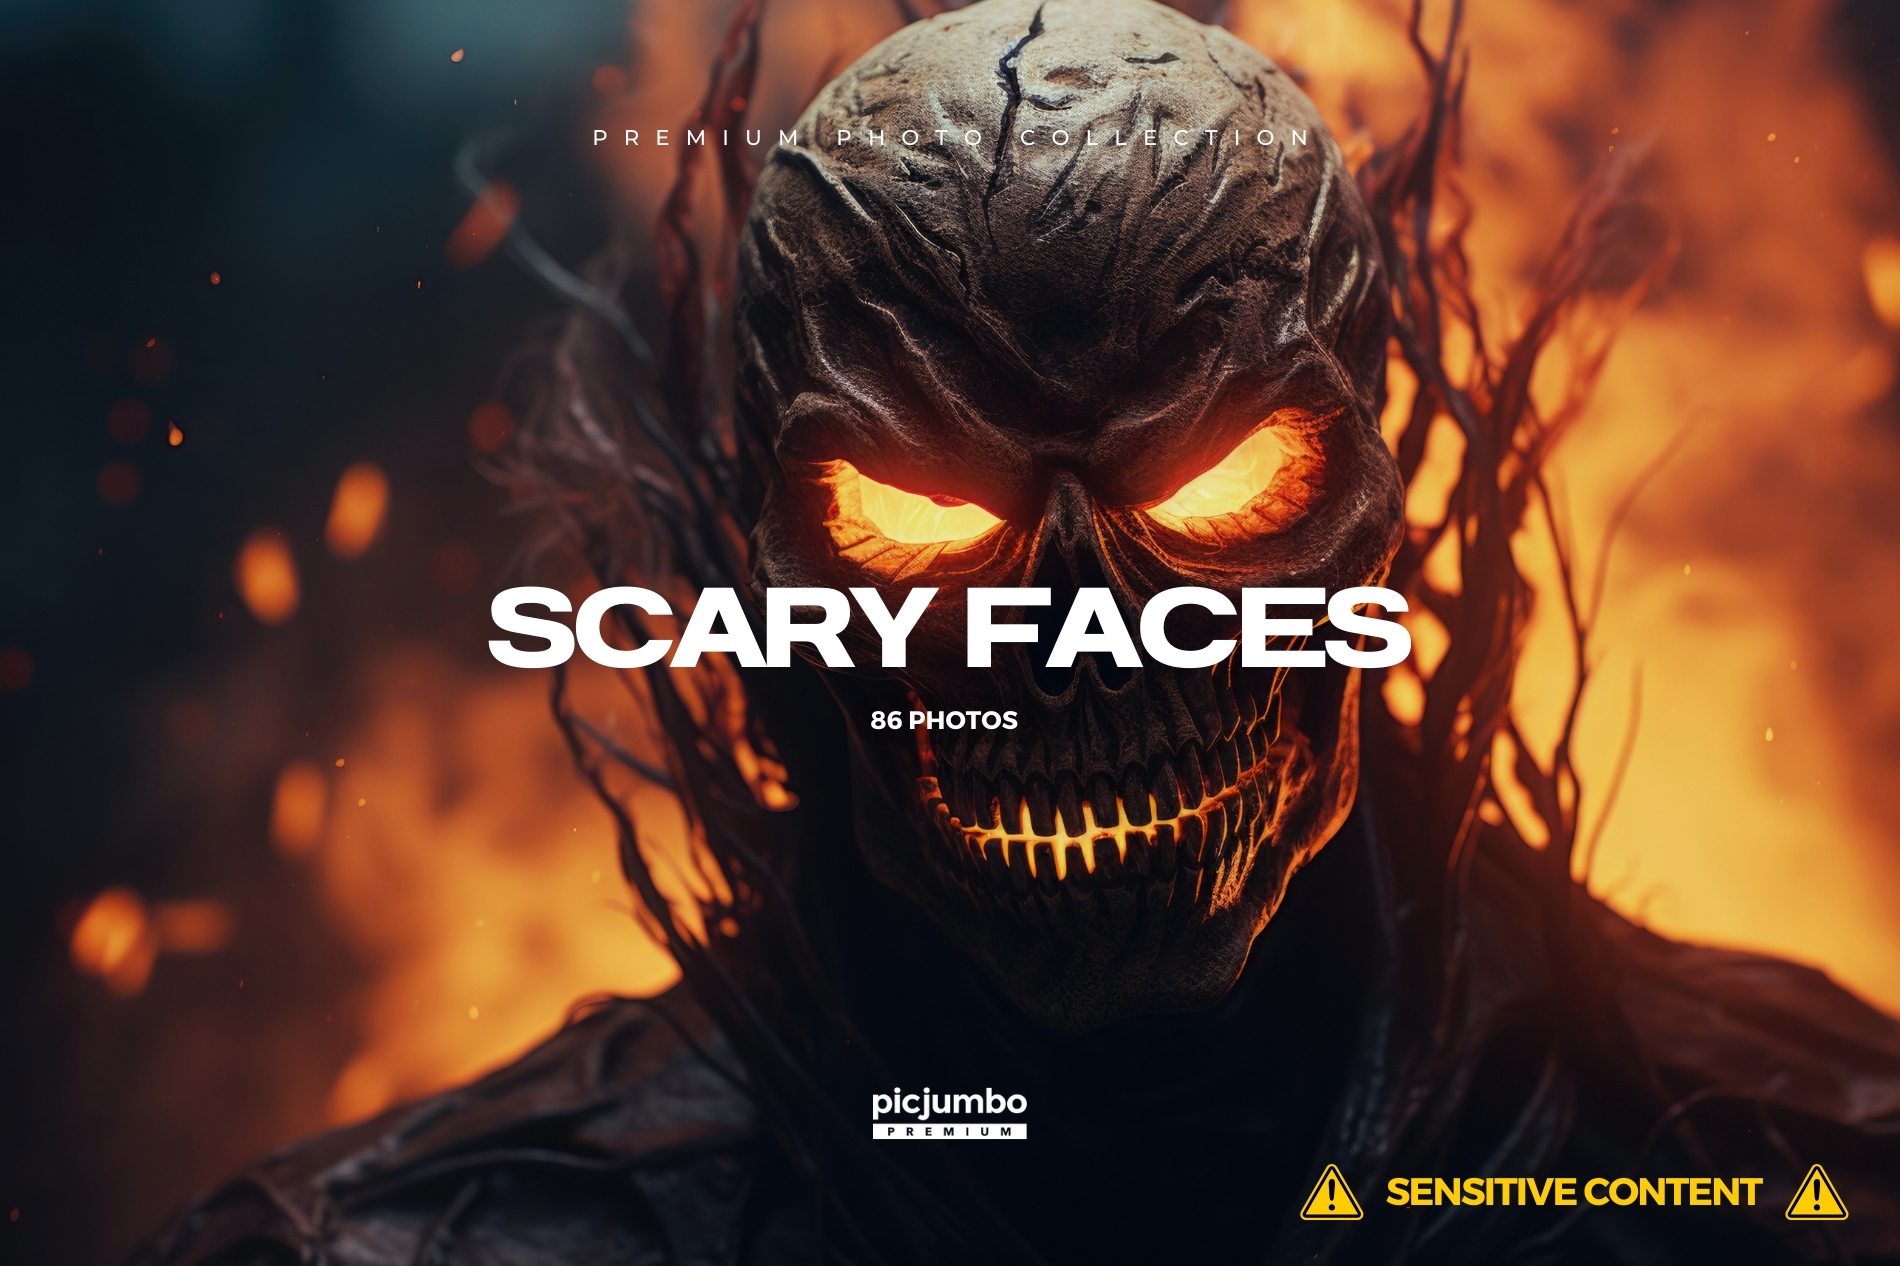 Download hi-res stock photos from our Scary Faces PREMIUM Collection!